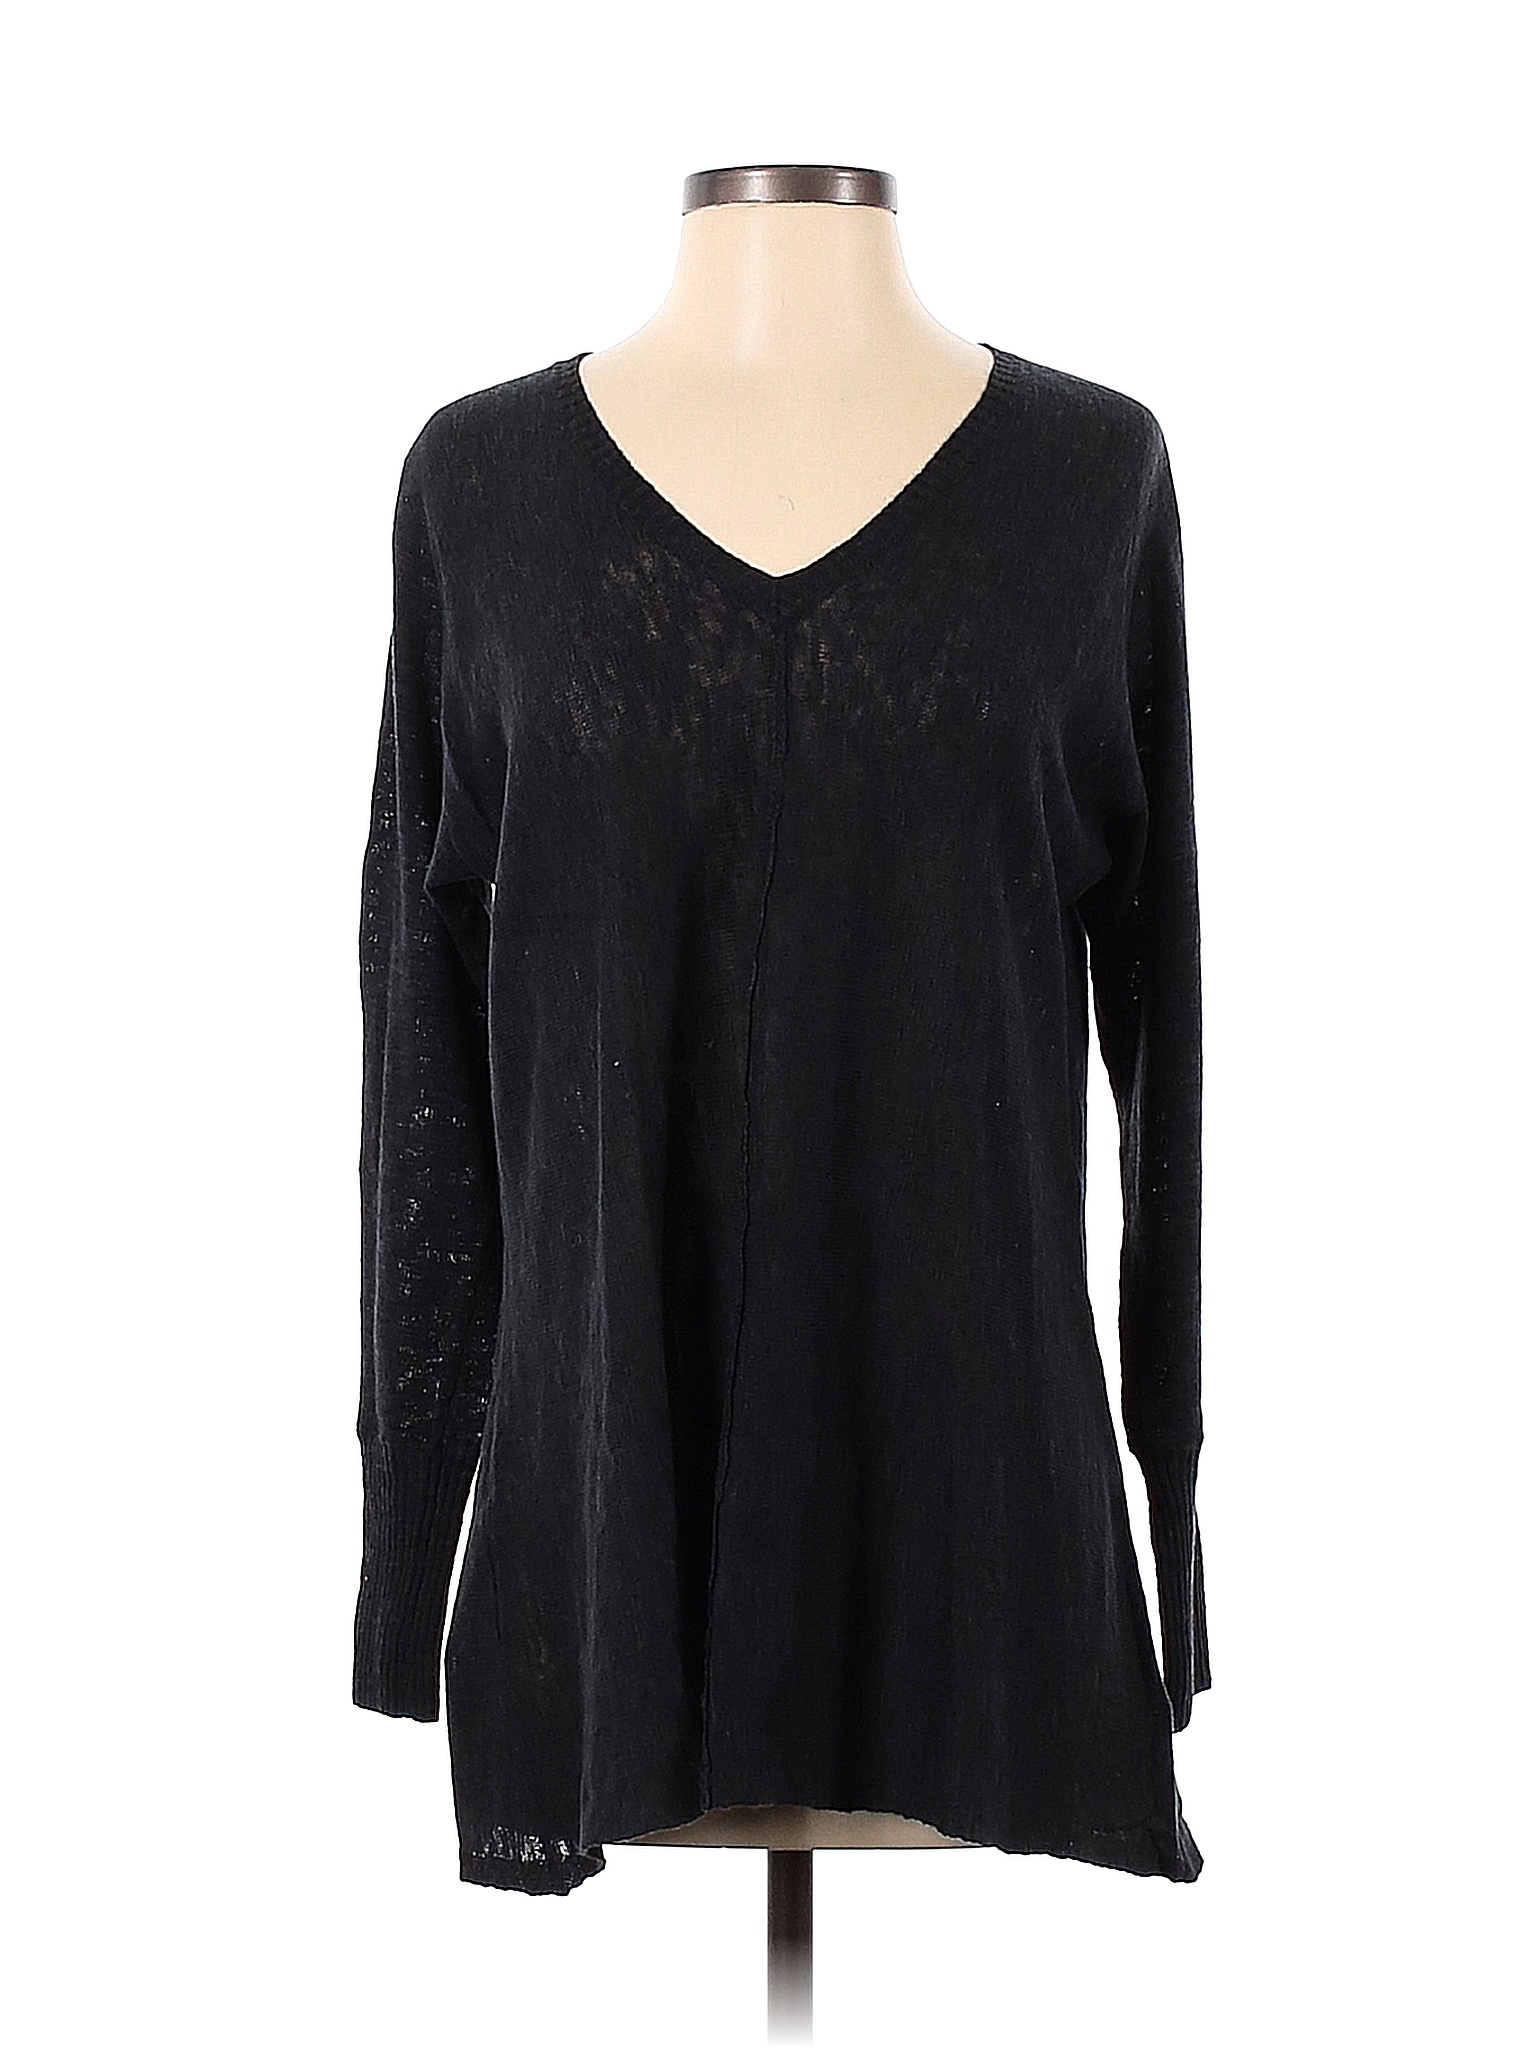 Travelsmith Solid Black Long Sleeve Top Size S - 77% off | thredUP